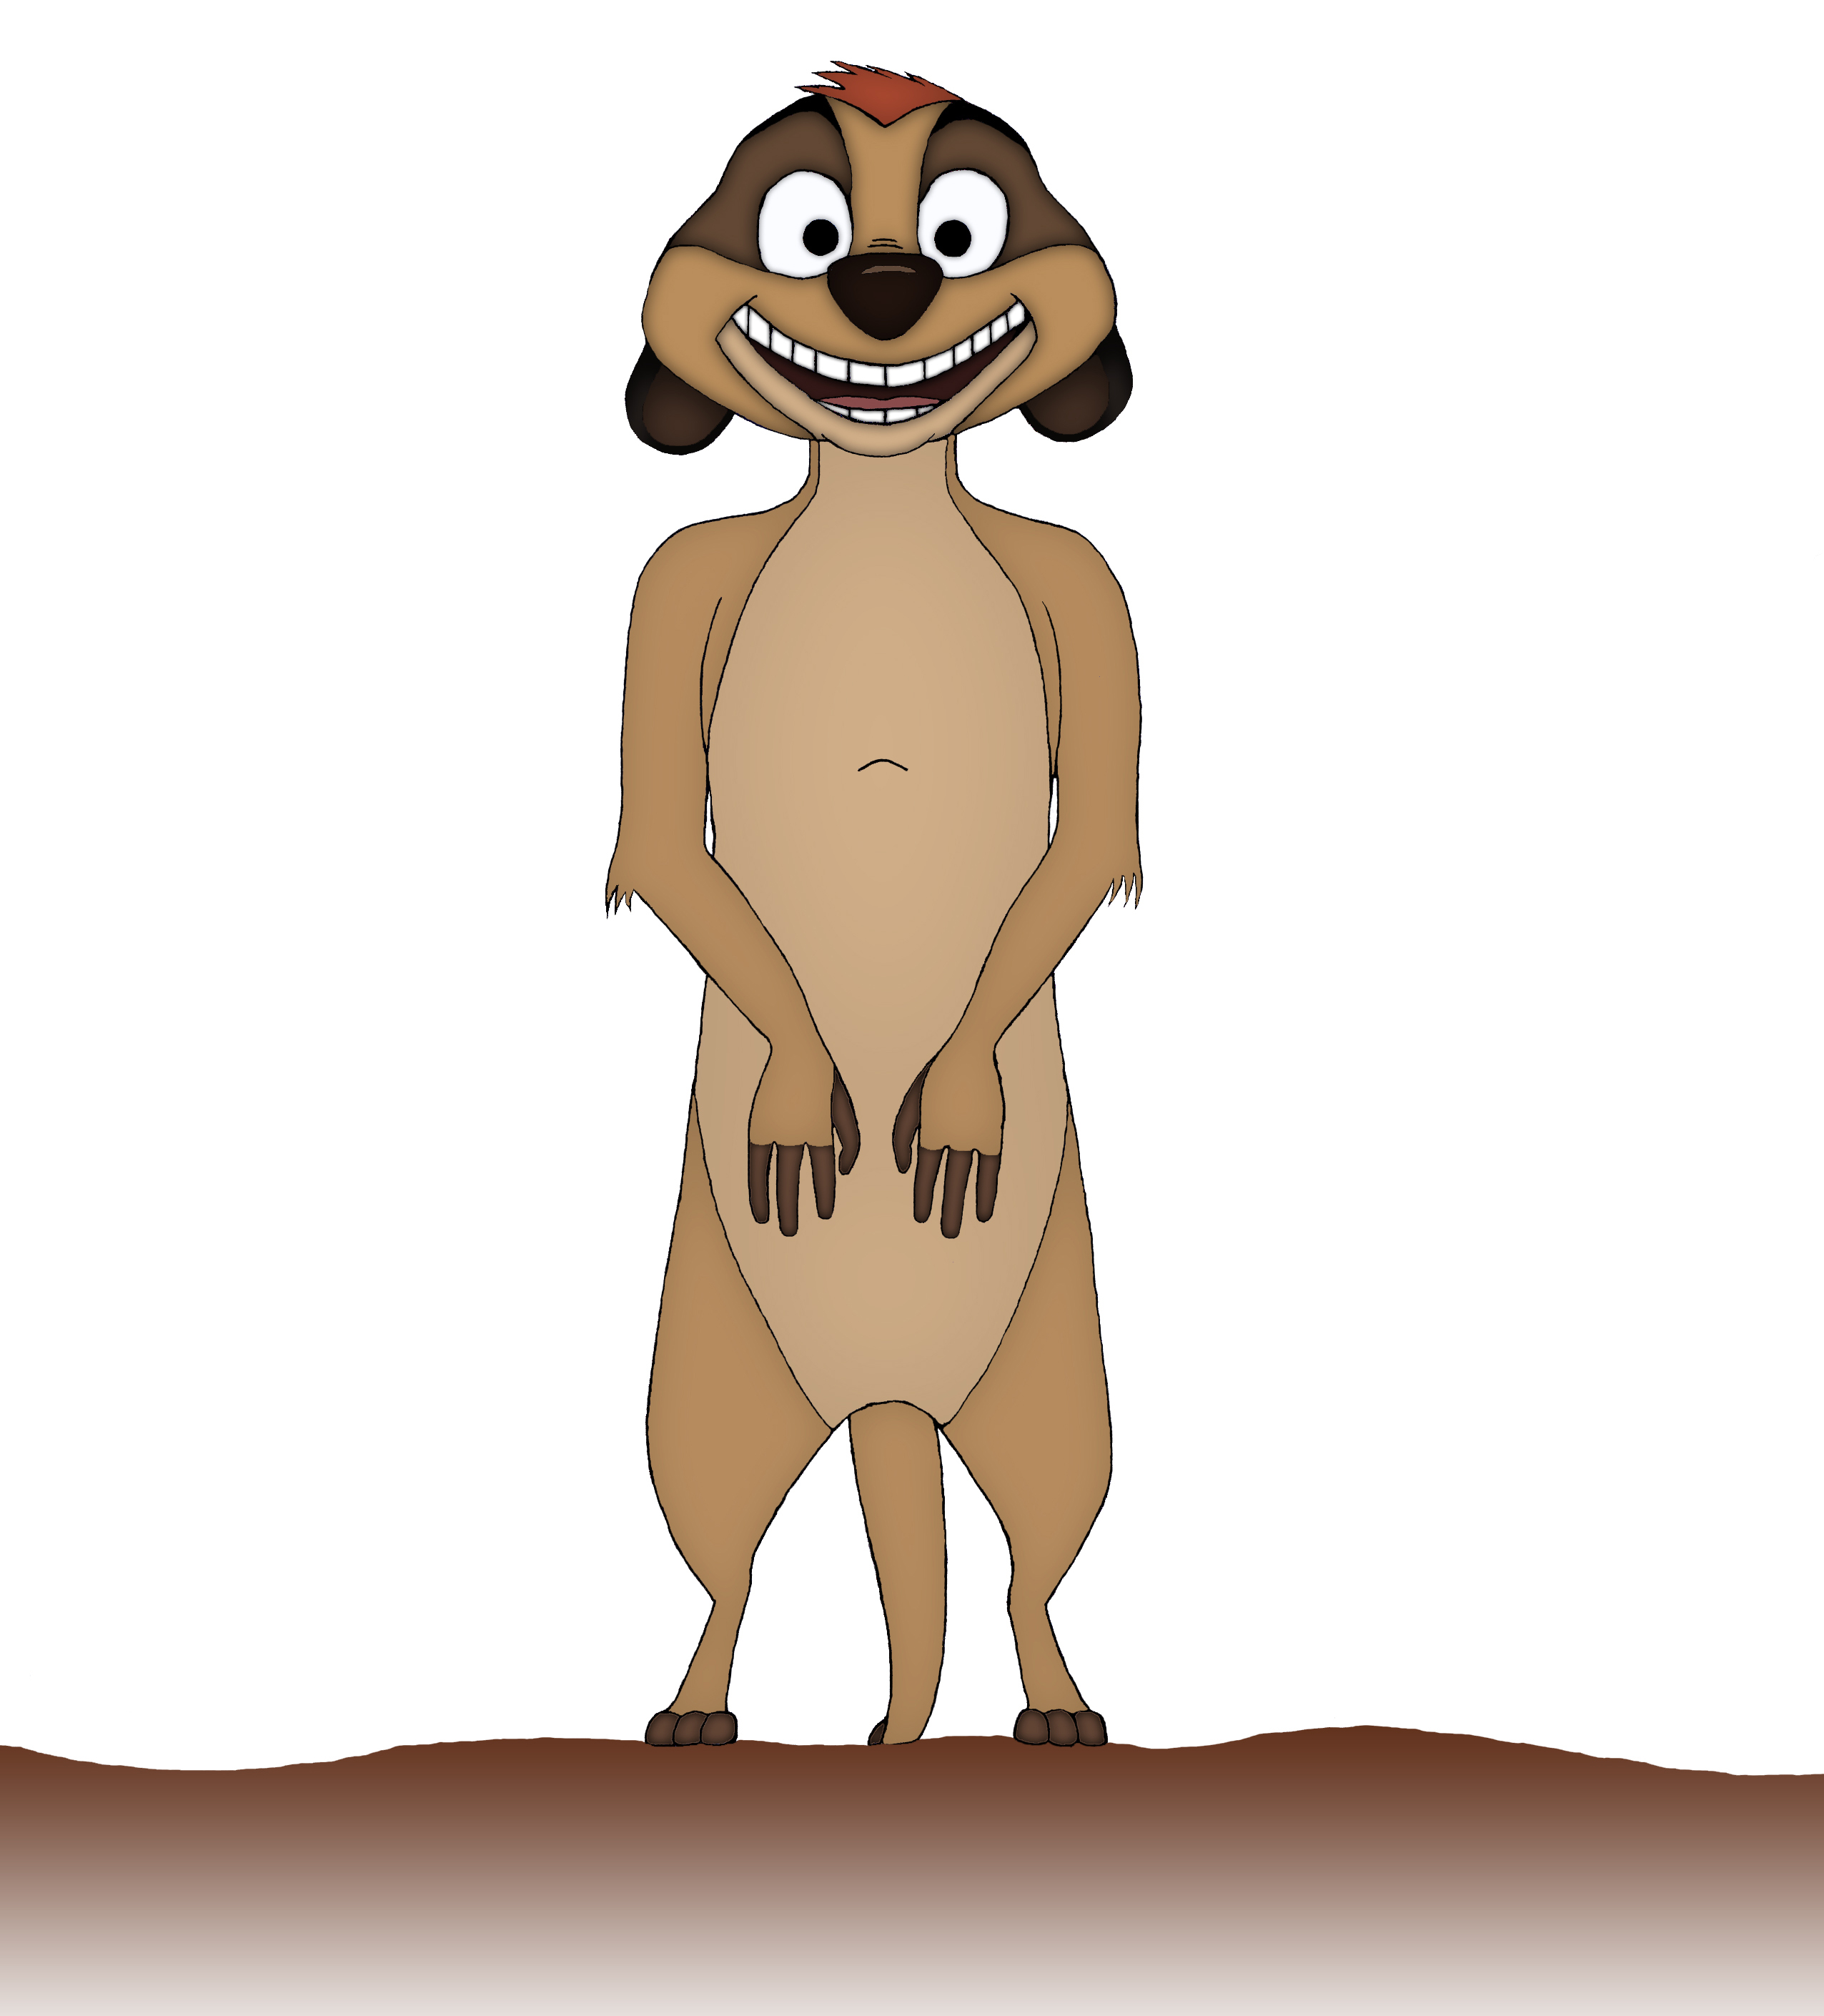 Timon by Caspersghost